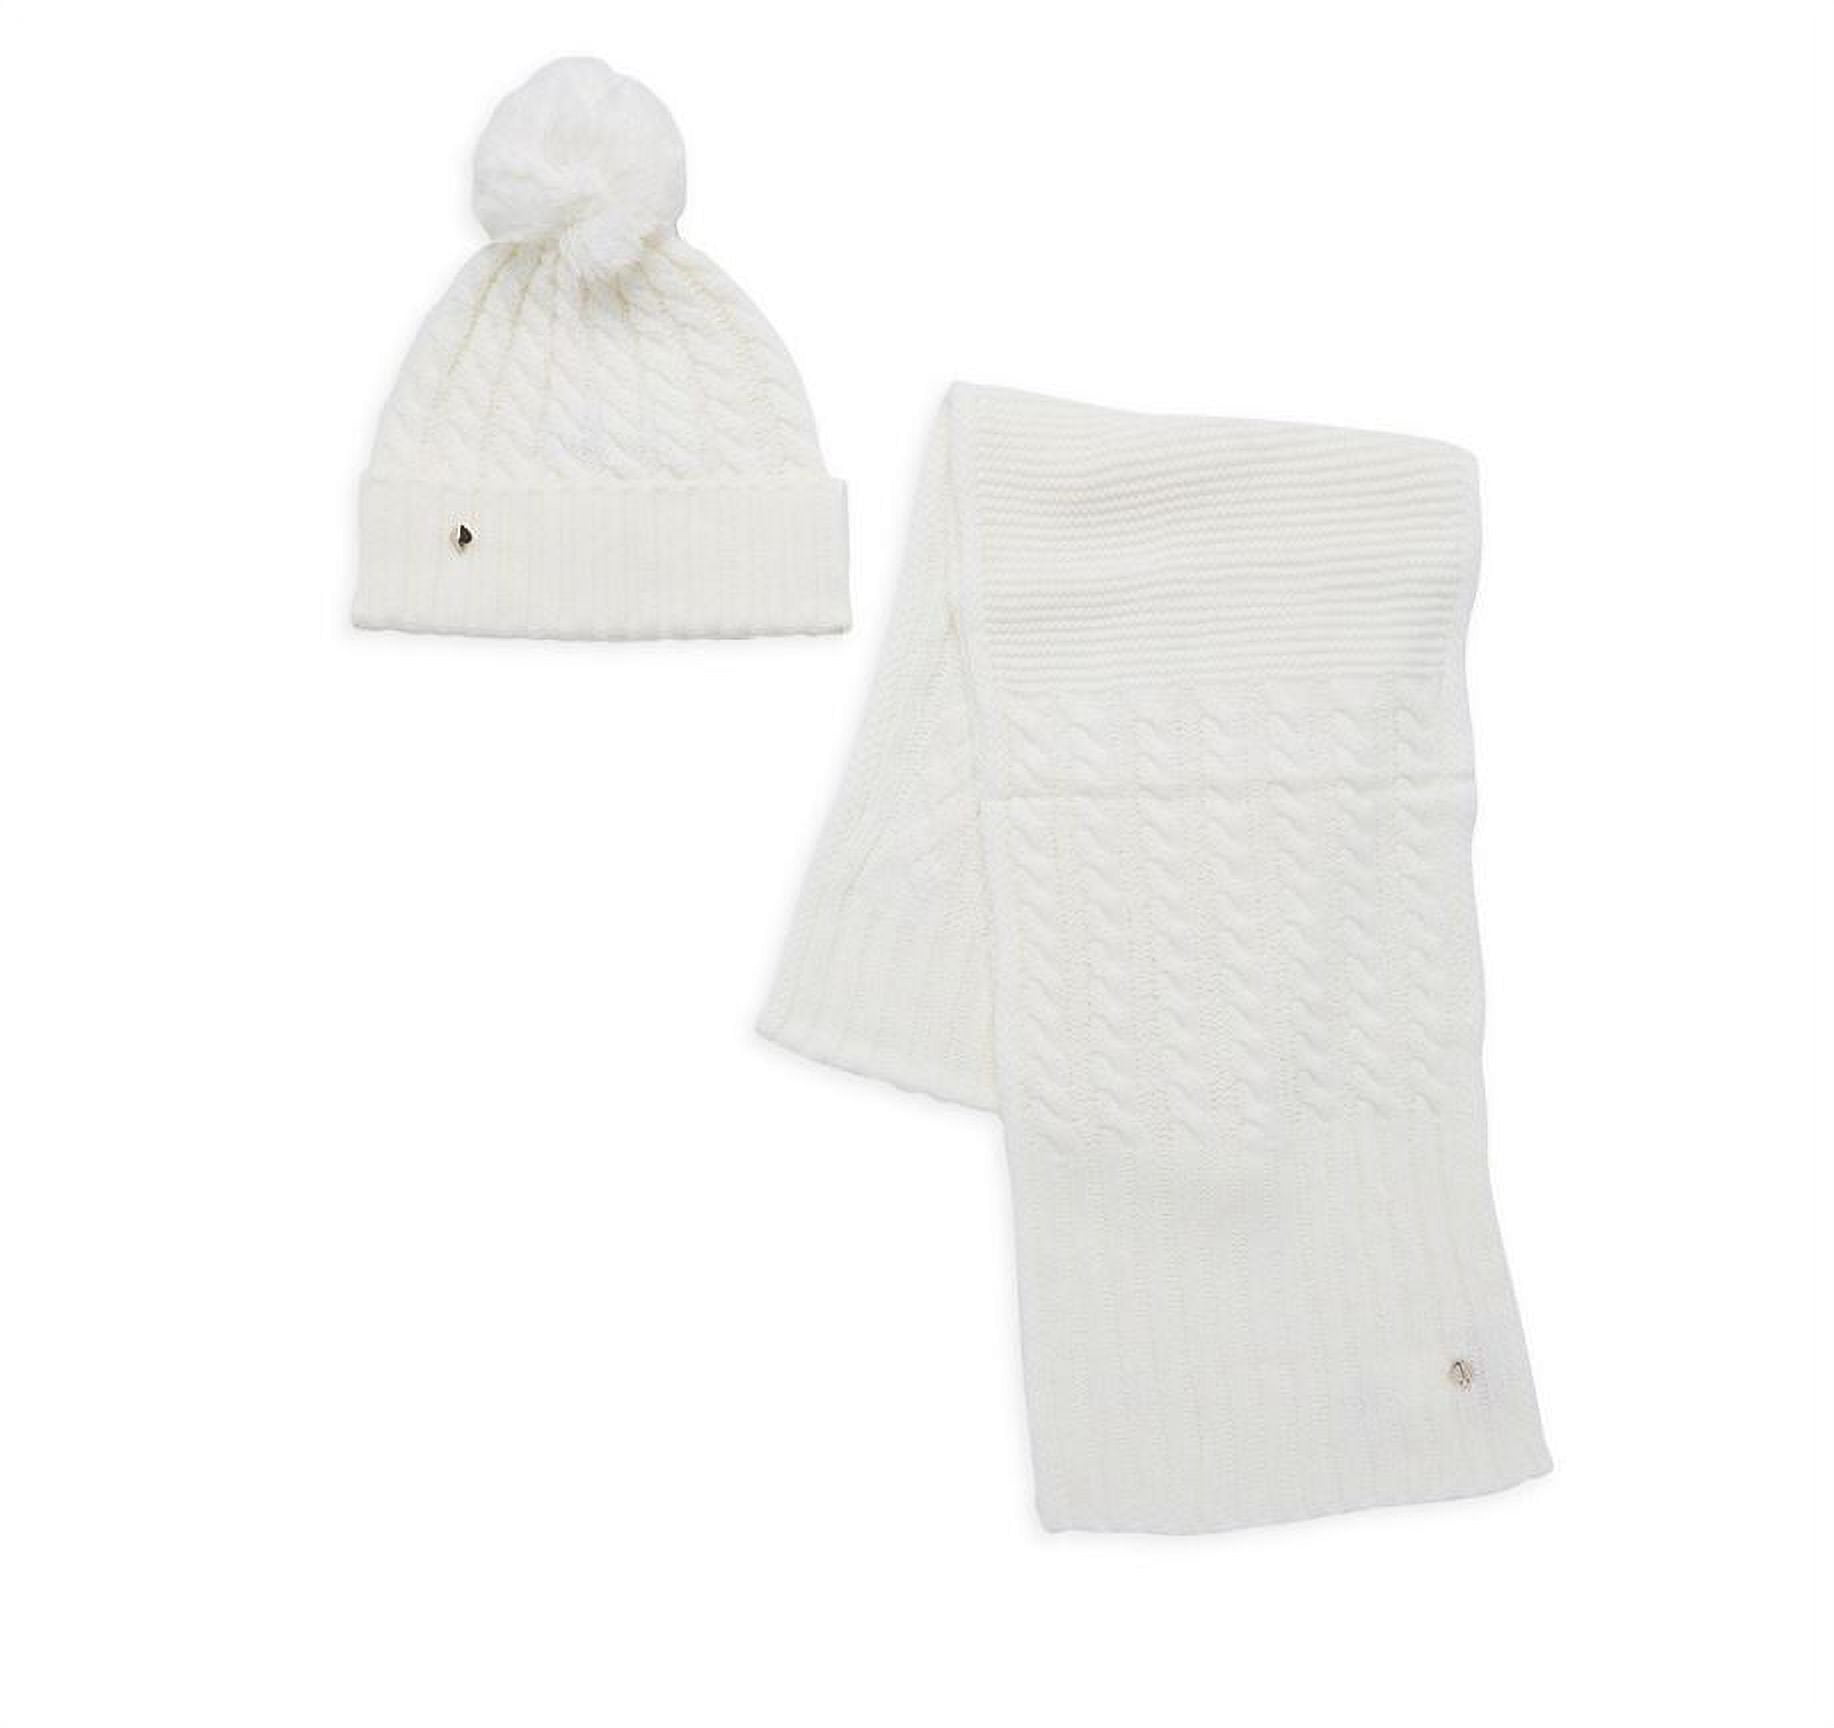 Beanie for Spade Hat Muffler Scarf Kate Women French Cable-Knit Cream Set York & New